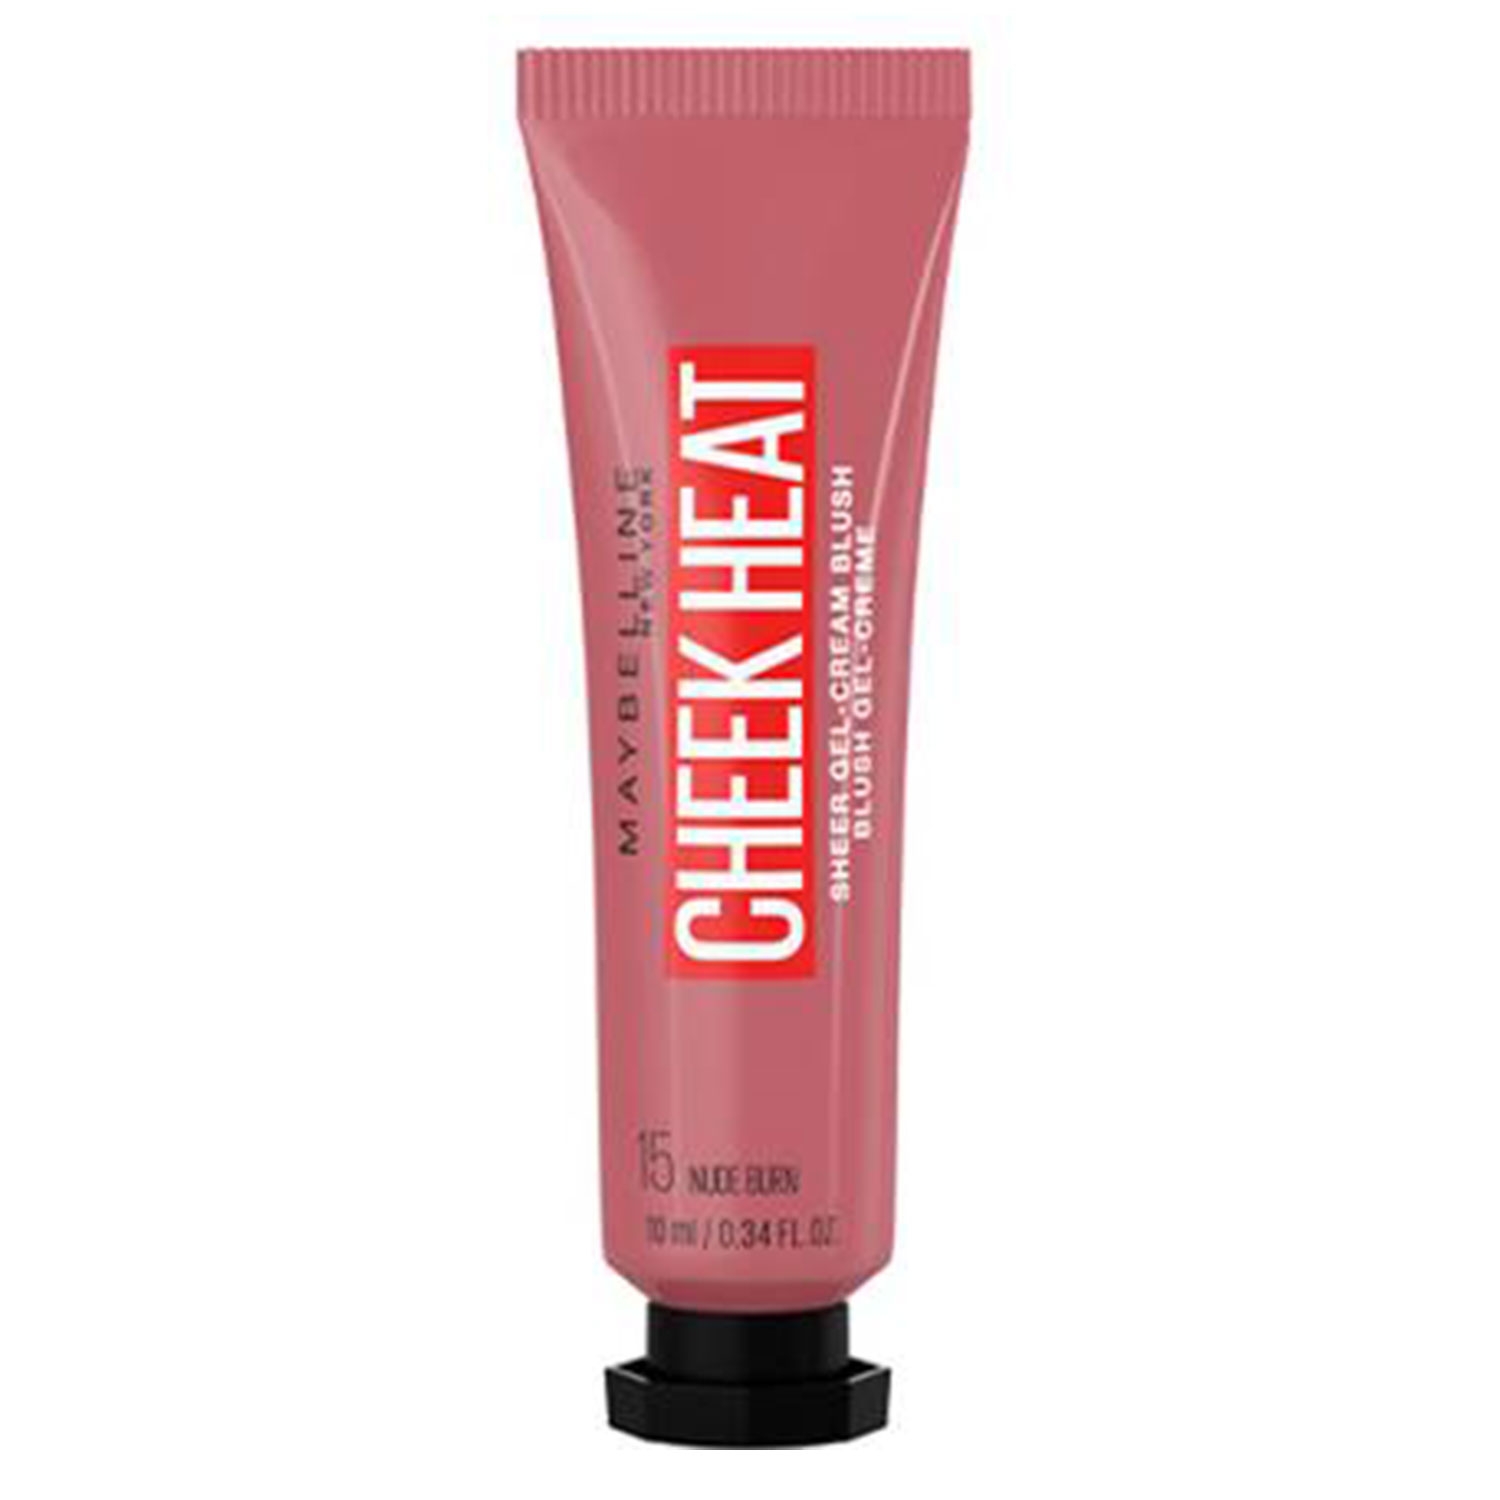 Product image from Maybelline NY Cheeks - Cheek Heat Rouge 15 Nude Burn